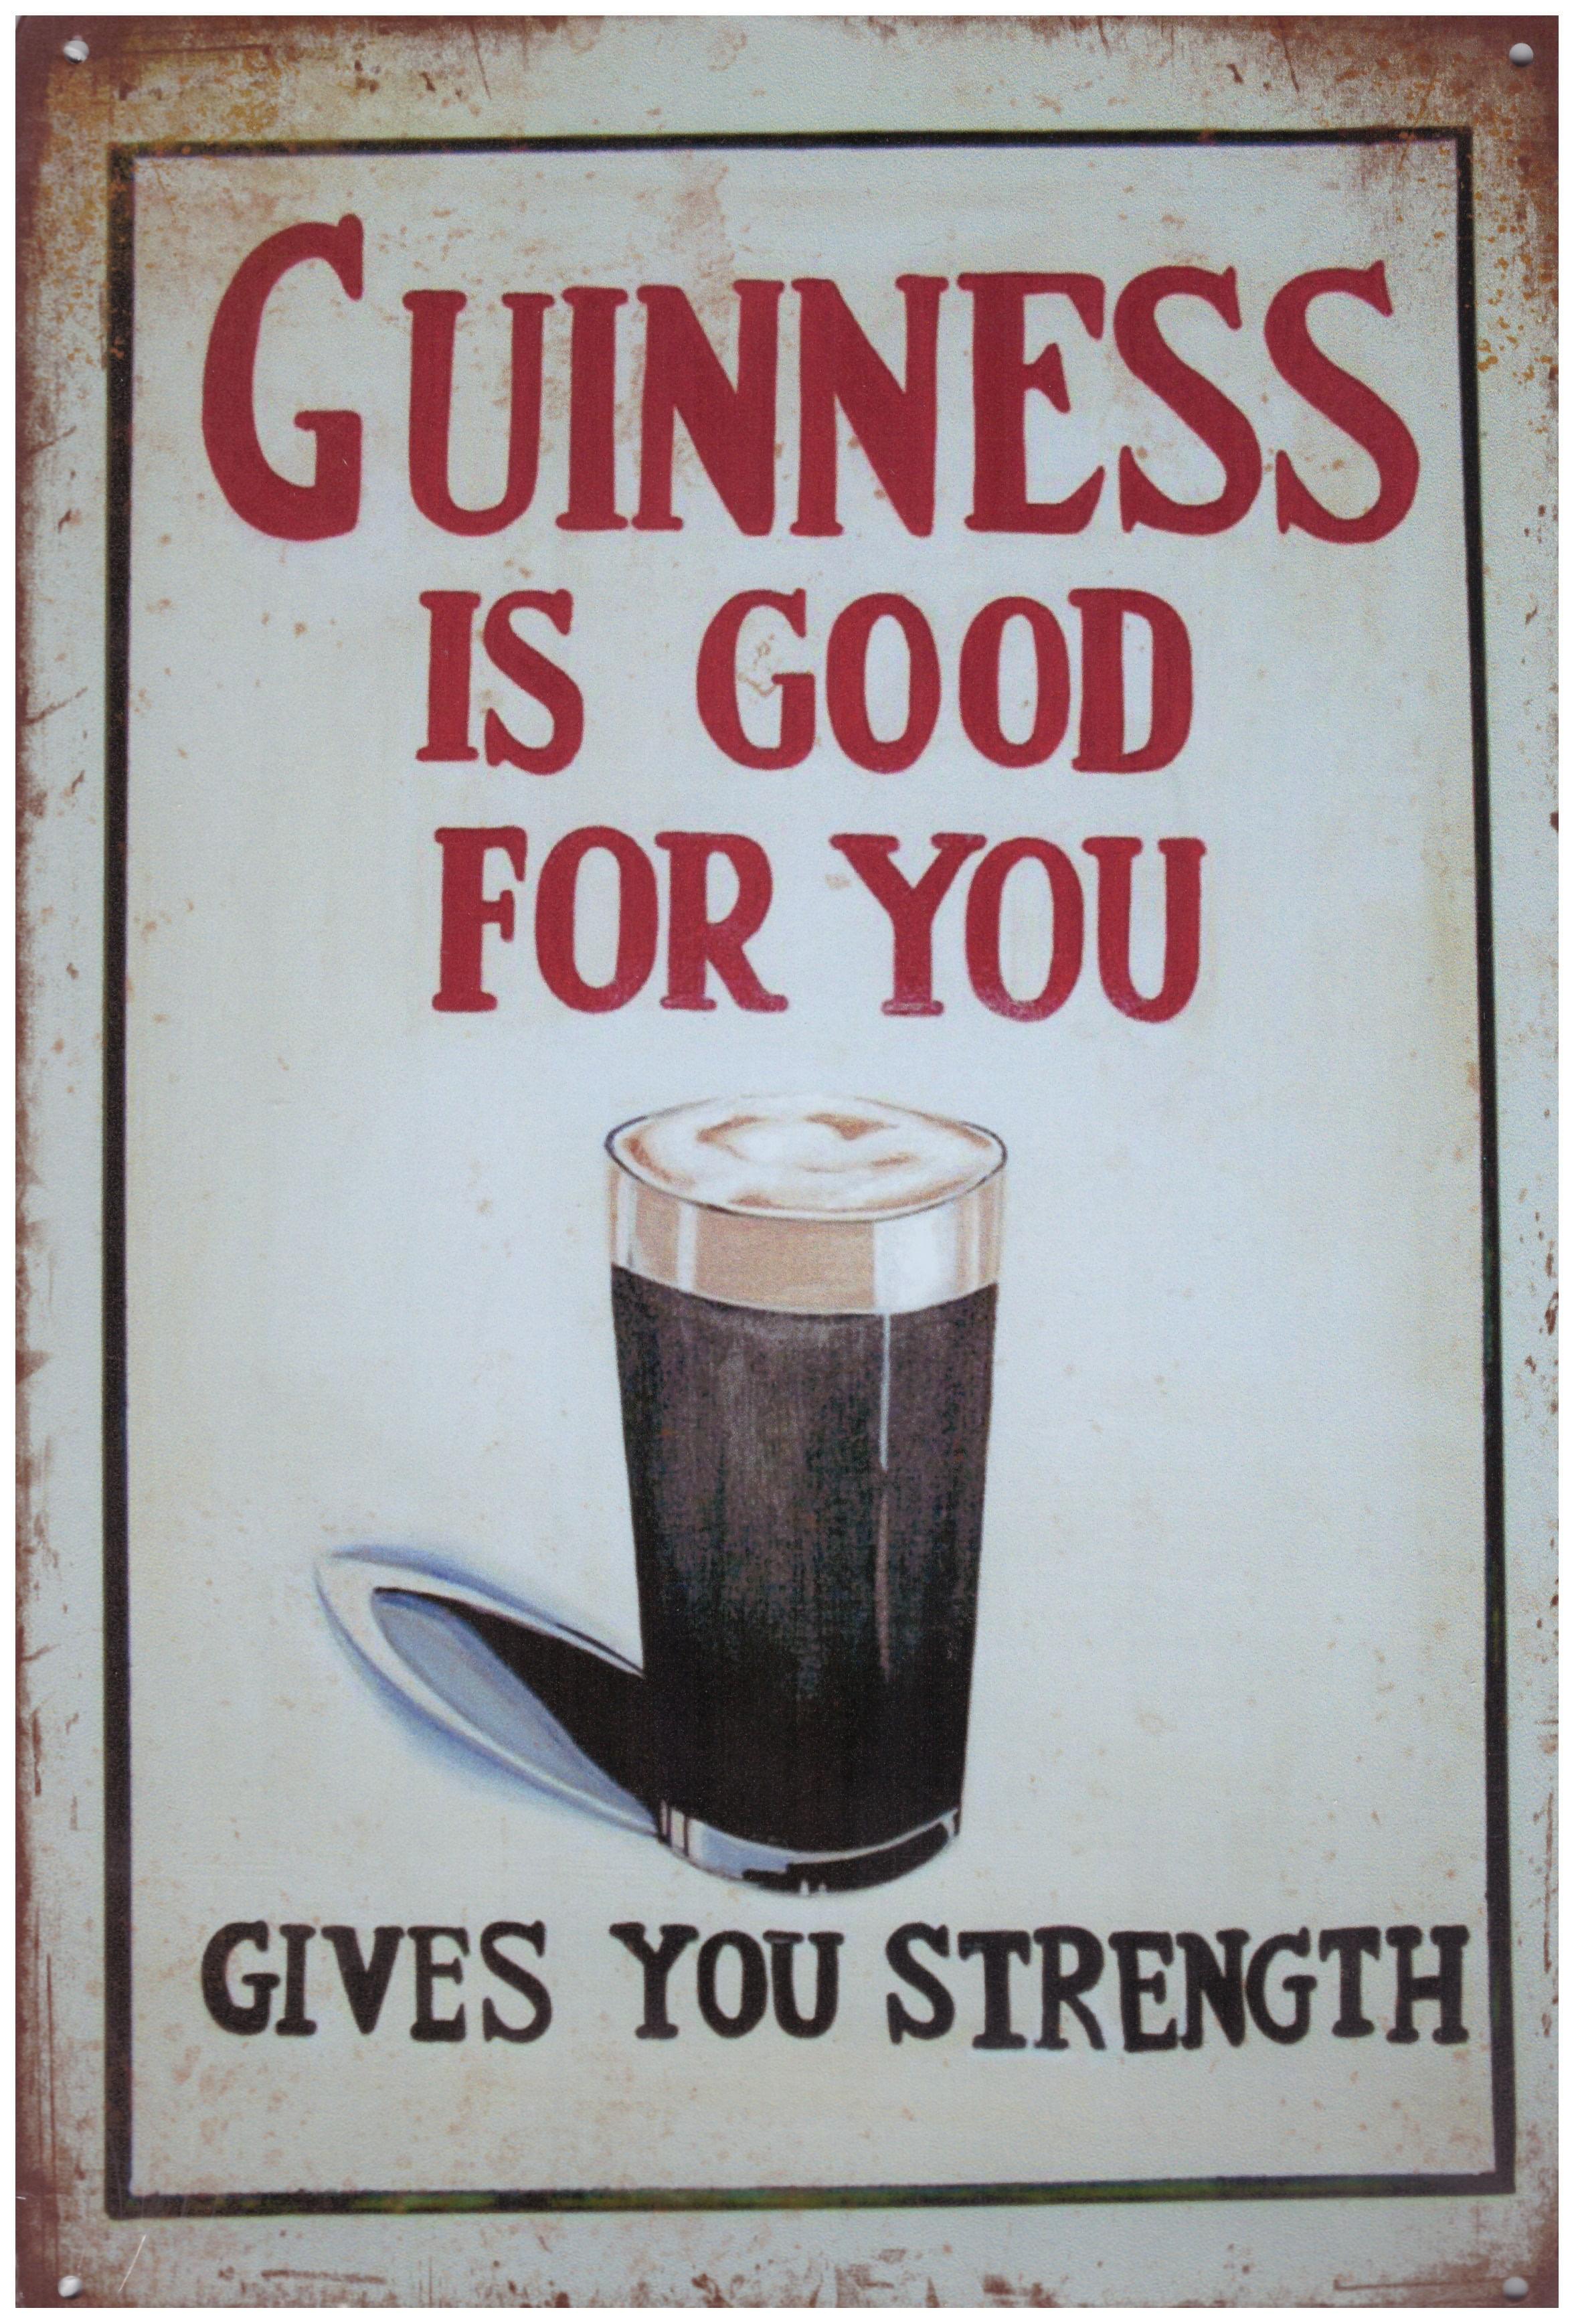 Guiness is good for you